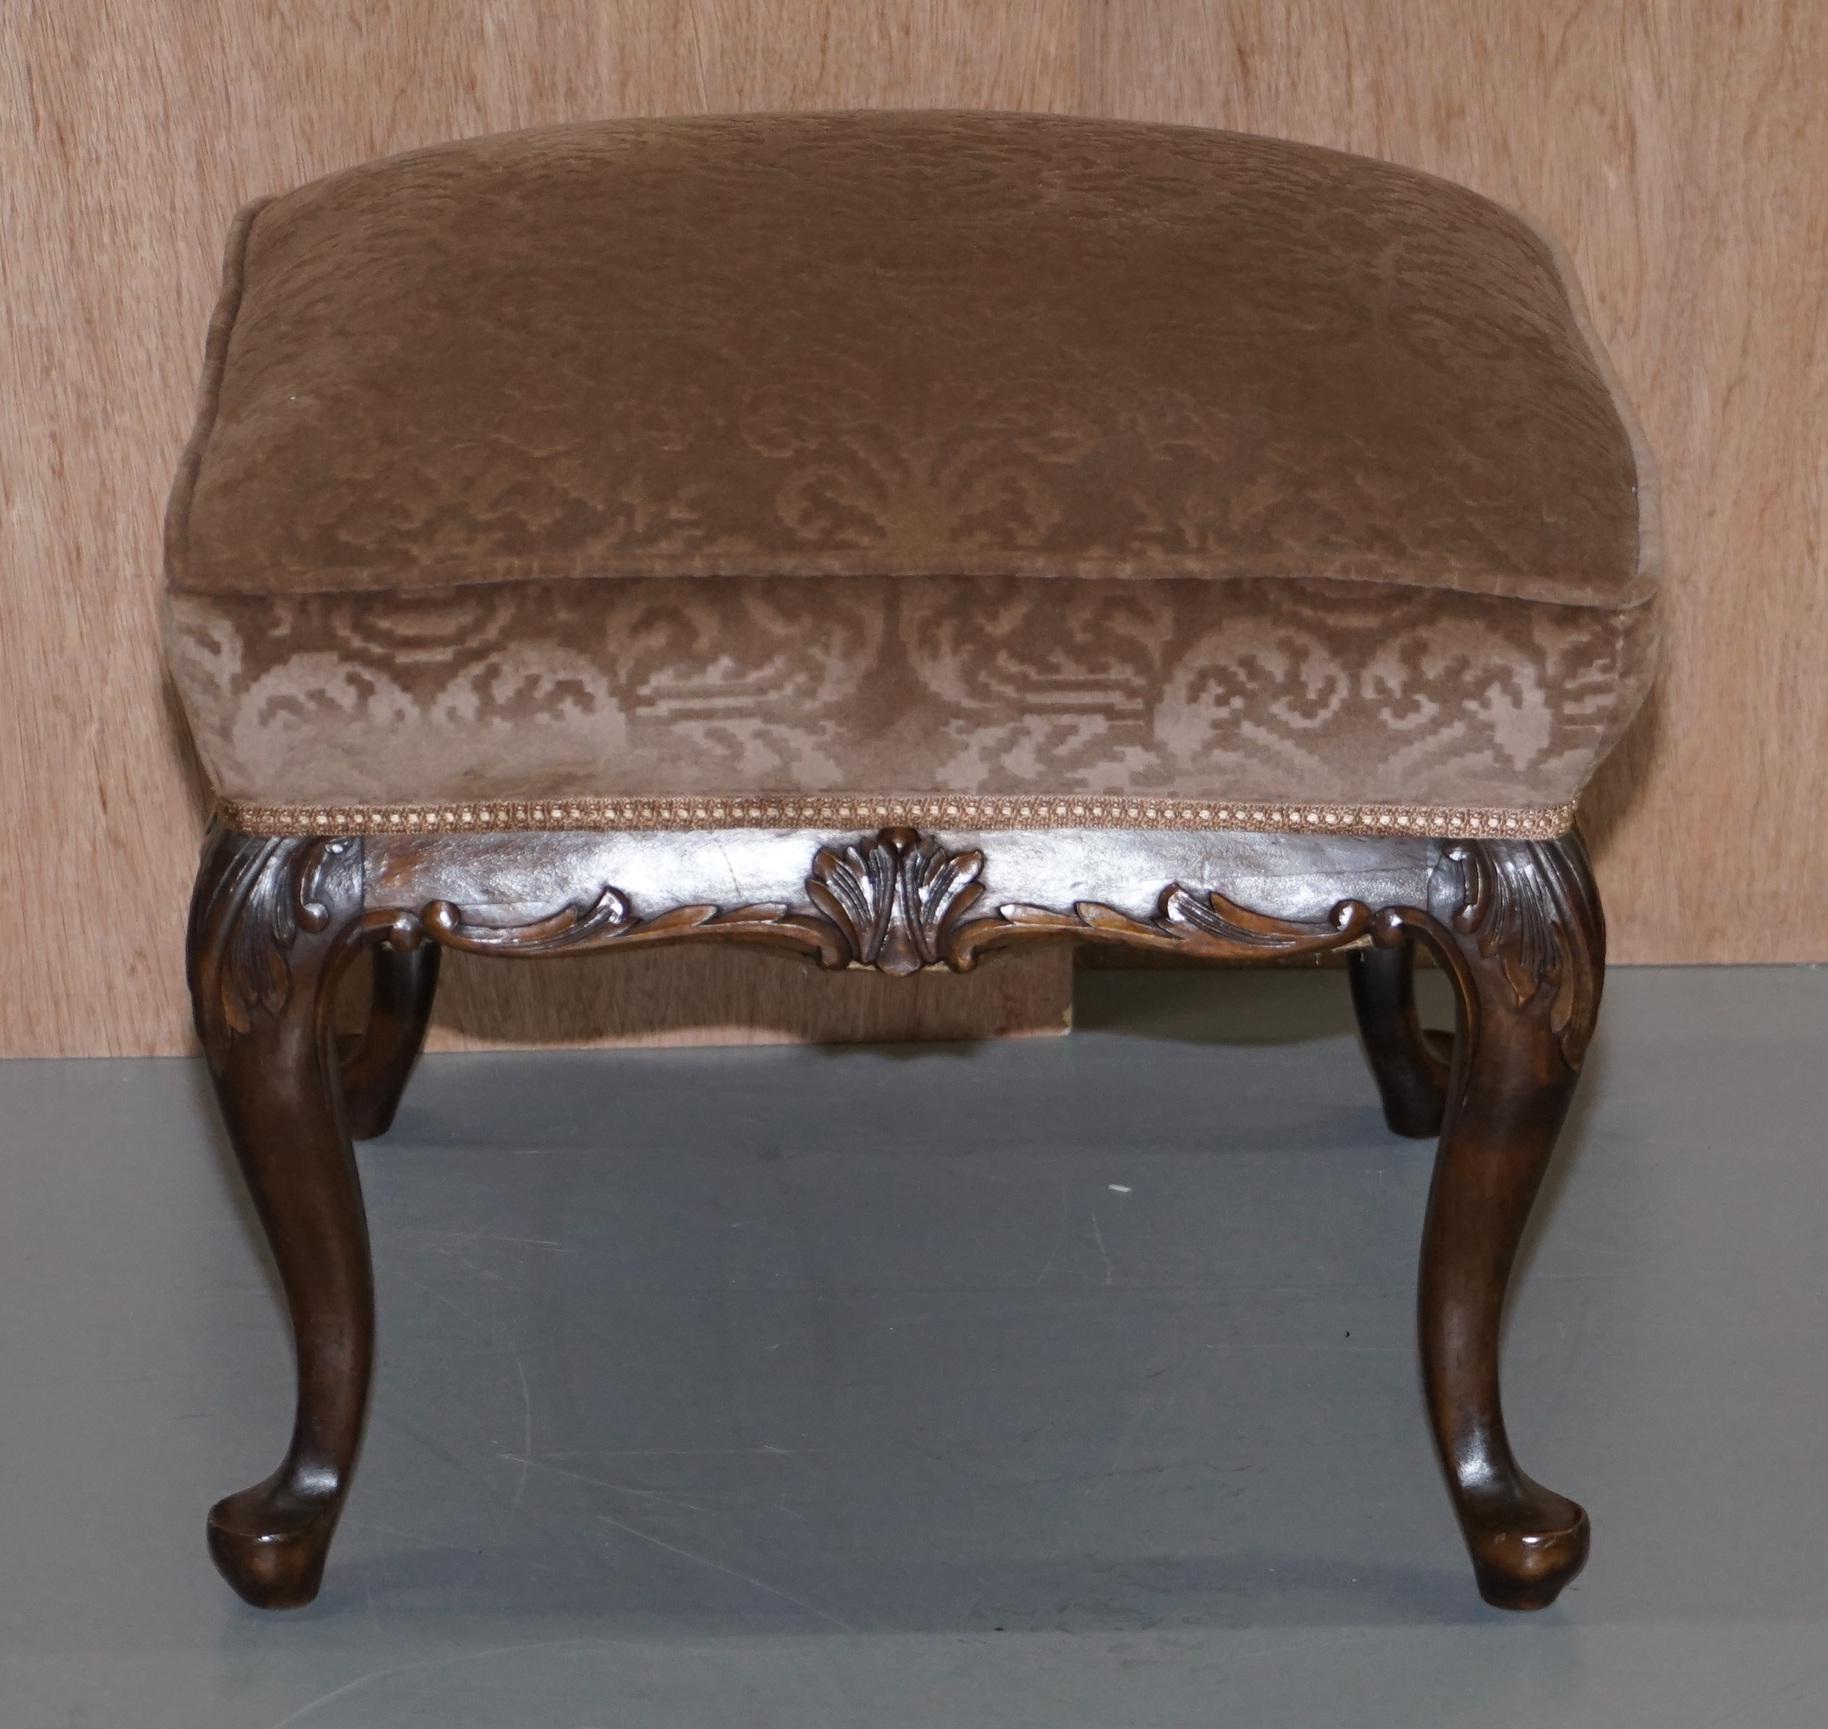 Upholstery Sublime Pair of circa 1860 Antique Victorian Footstools Stools Carved Hardwood For Sale